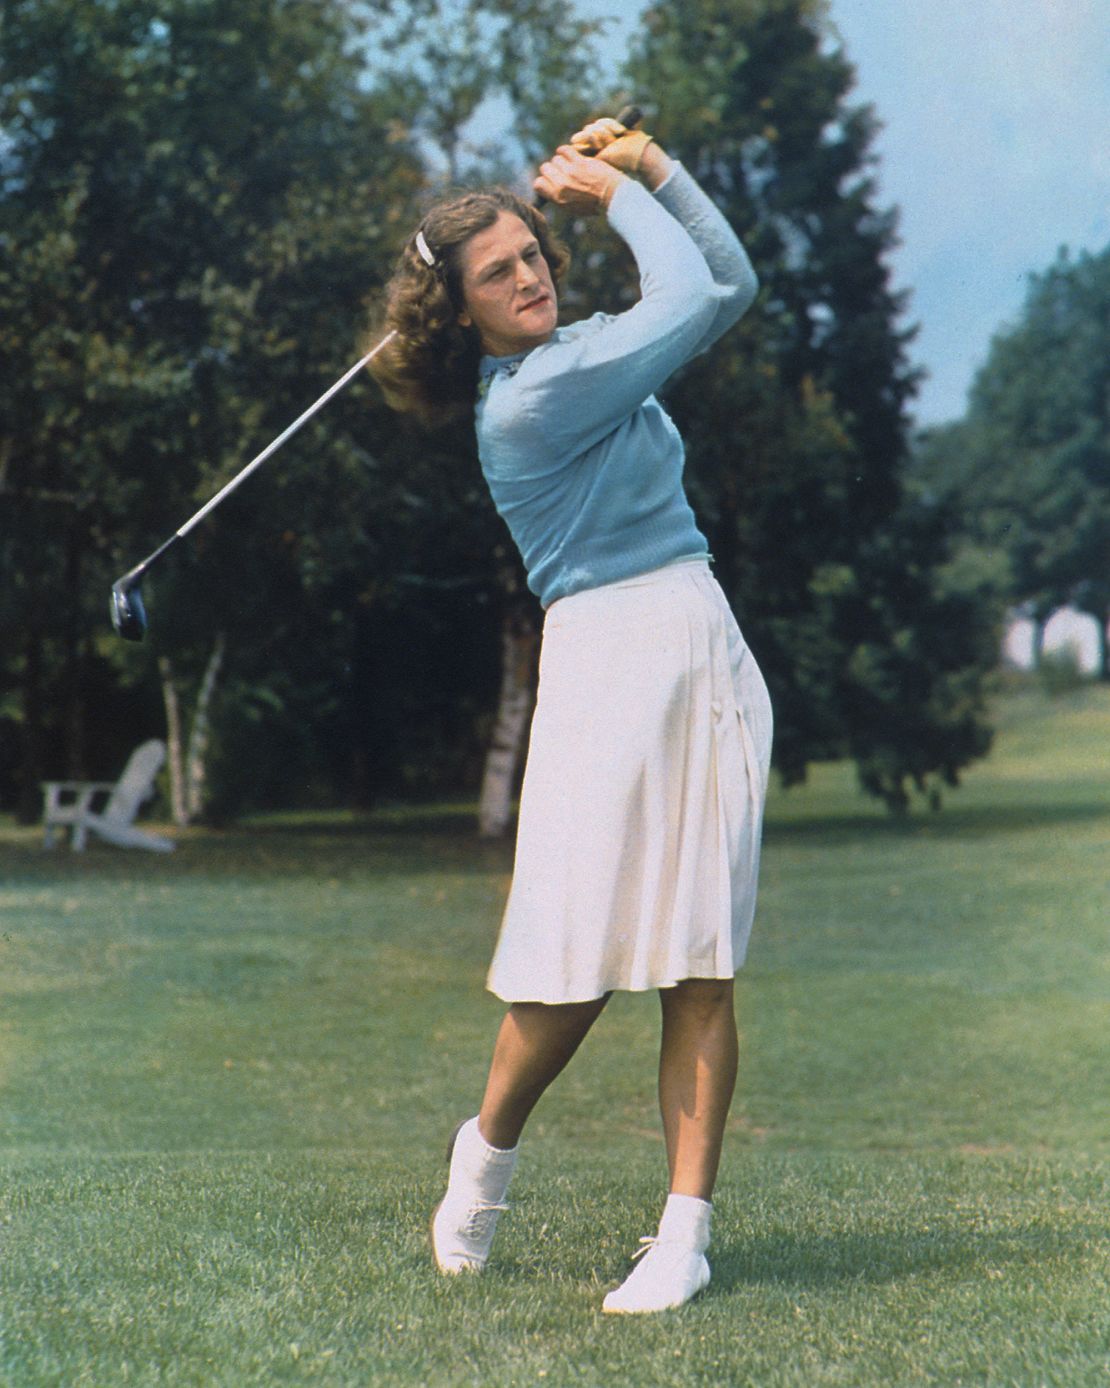 Van Natta Jr. believes it is "quite disappointing" that Zaharias' name isn't better known given all she did for golf.